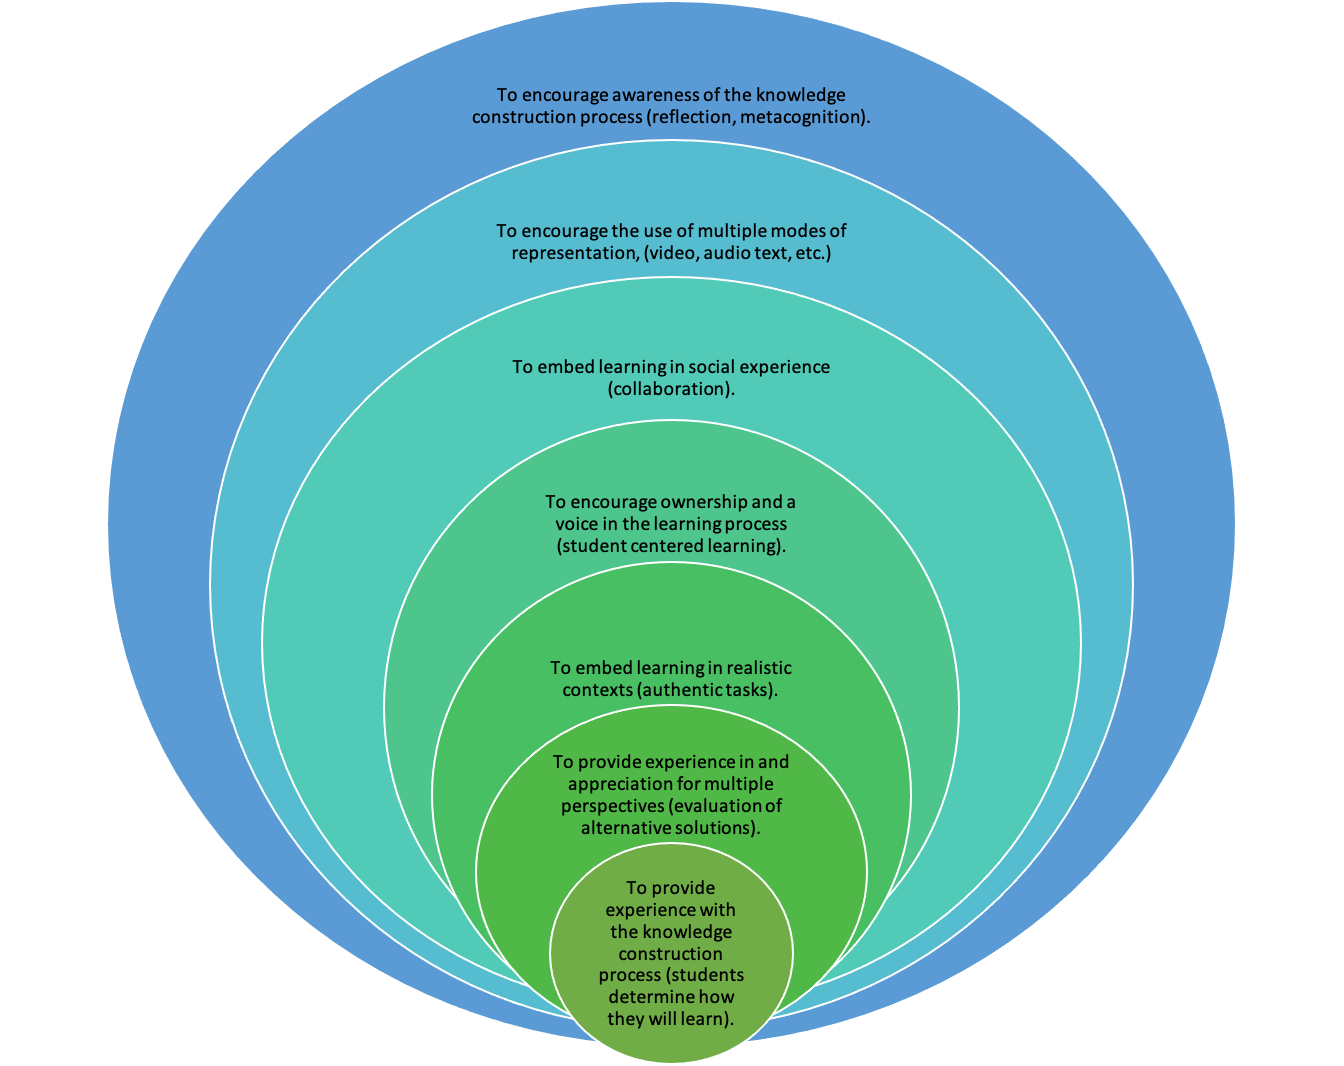 Circular graphic listing the seven pedagogical goals of constructivist learning environments.